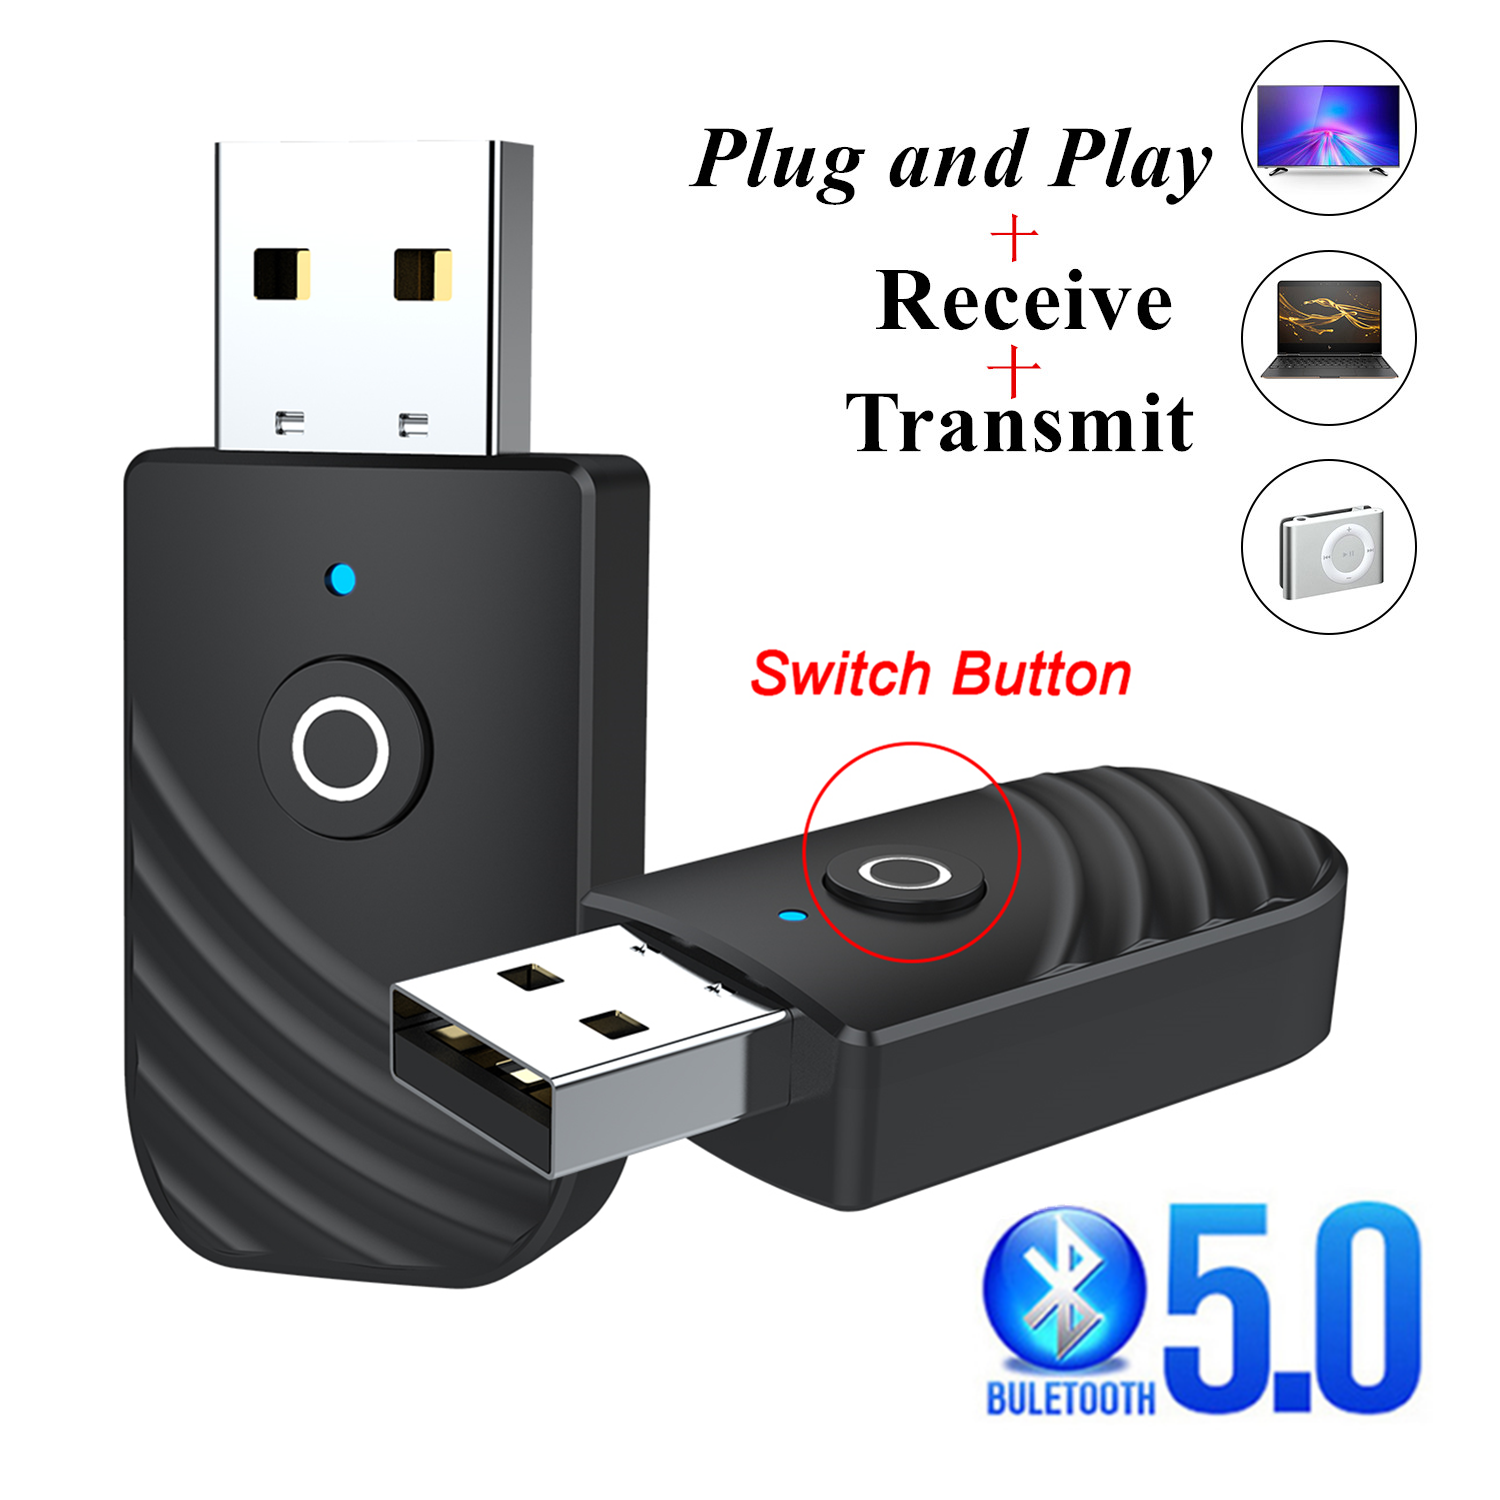 ENKAY-SY319-bluetooth-50-Audio-Receiver-Transmitter-Adapter-3-In-1-Mini-35mm-Jack-AUX-USB-Stereo-Mus-1712959